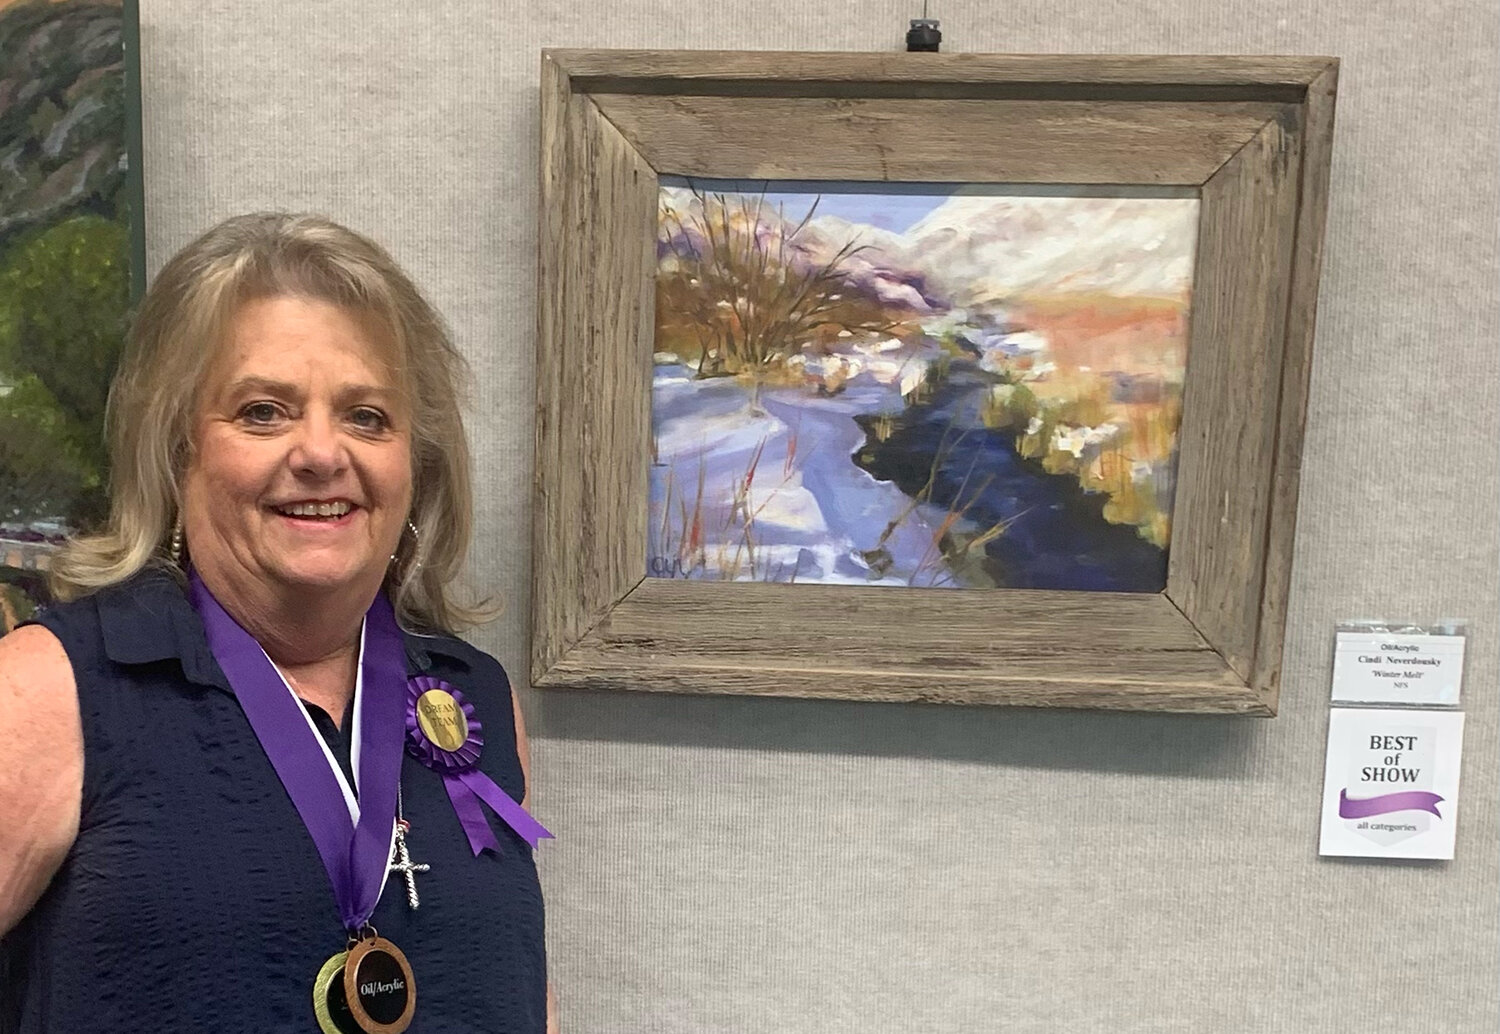 Cindi Neverdouski of Willow Park took home top honors from the Woman's Club of Fort Worth 59th annual Art Show with her oil-on-canvas rendition of  “Winter Melt.” The painting won Best of Show and is now on display at The Woman's Club on Pennsylvania Avenue.